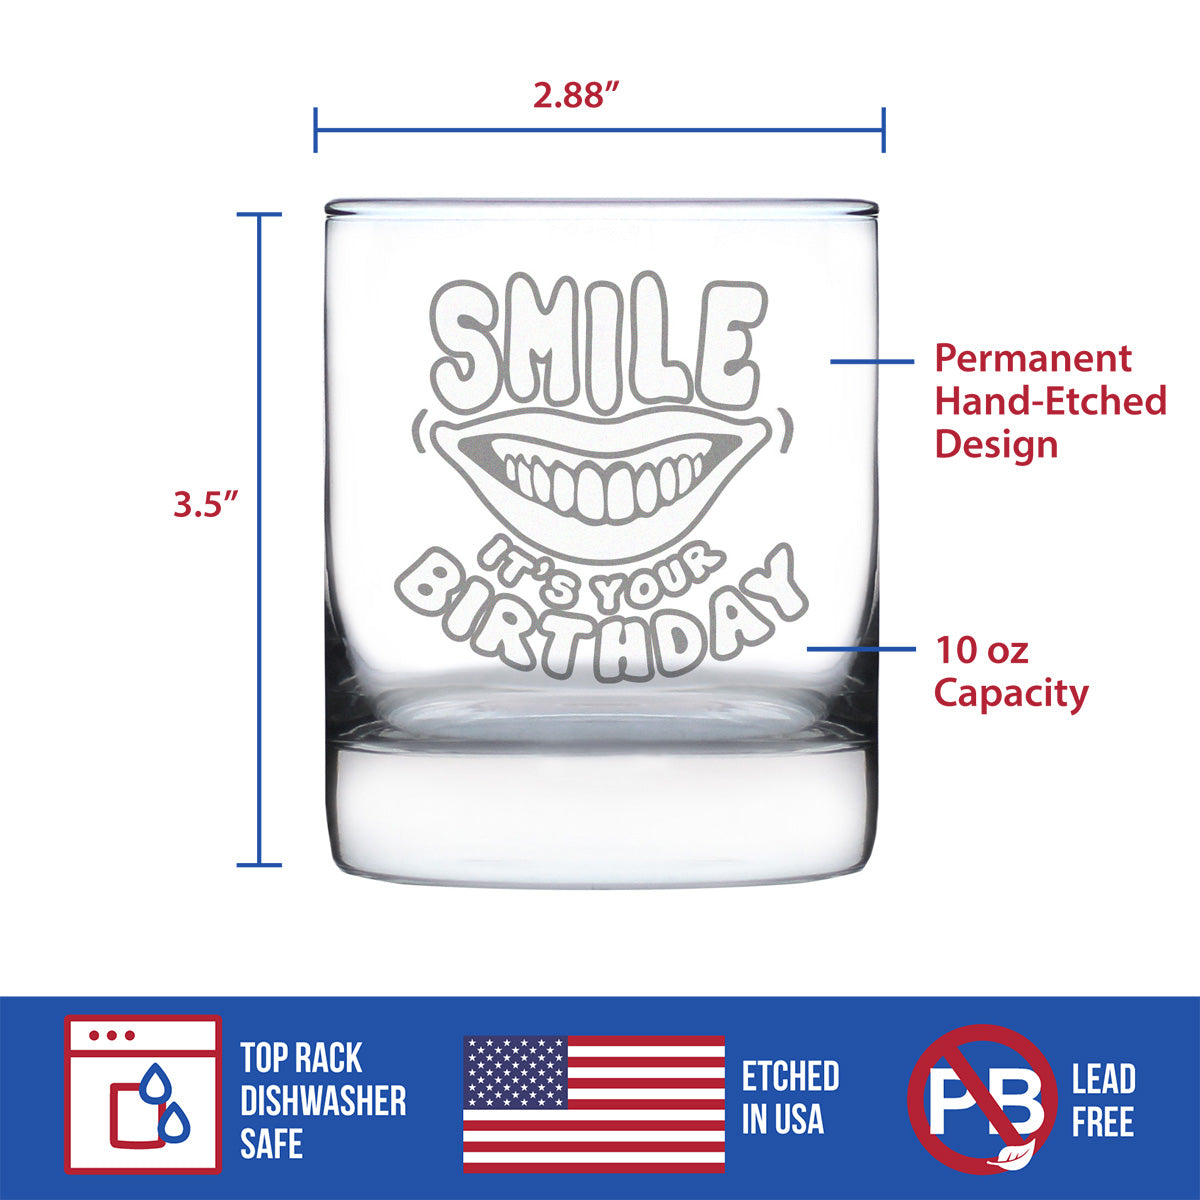 Smile it&#39;s Your Birthday - 10 Ounce Rocks Glass